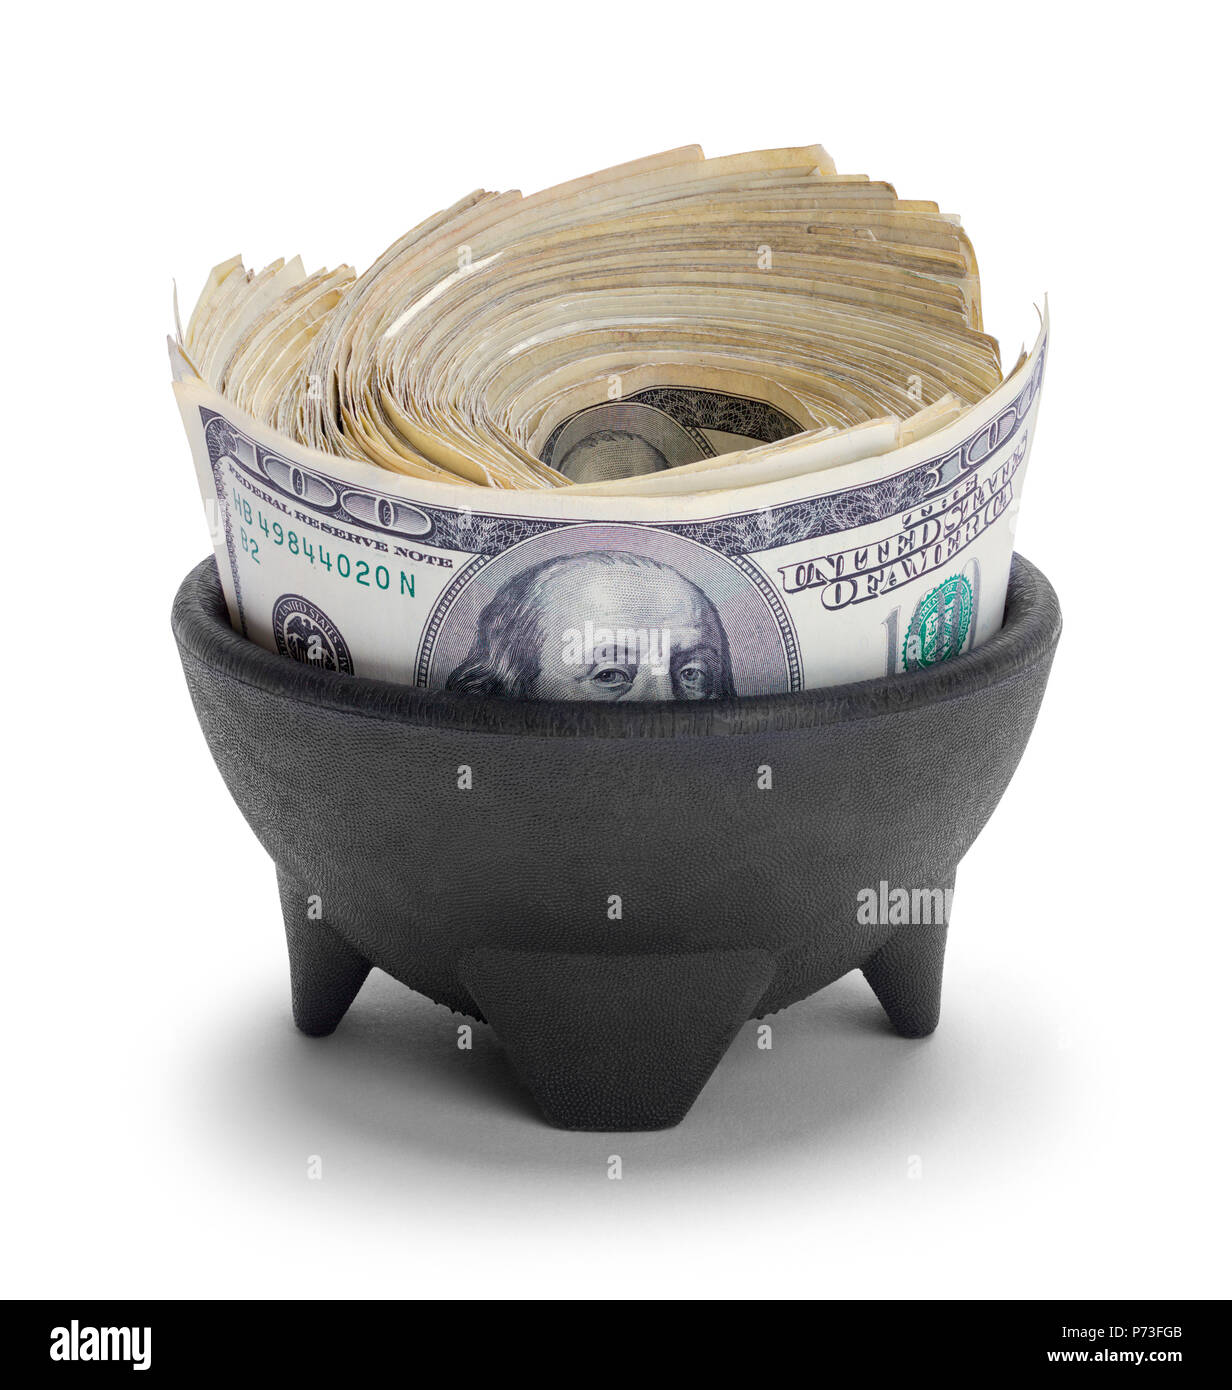 Pot with Large Roll of Hundred Dollar Bills Isolated on White. Stock Photo